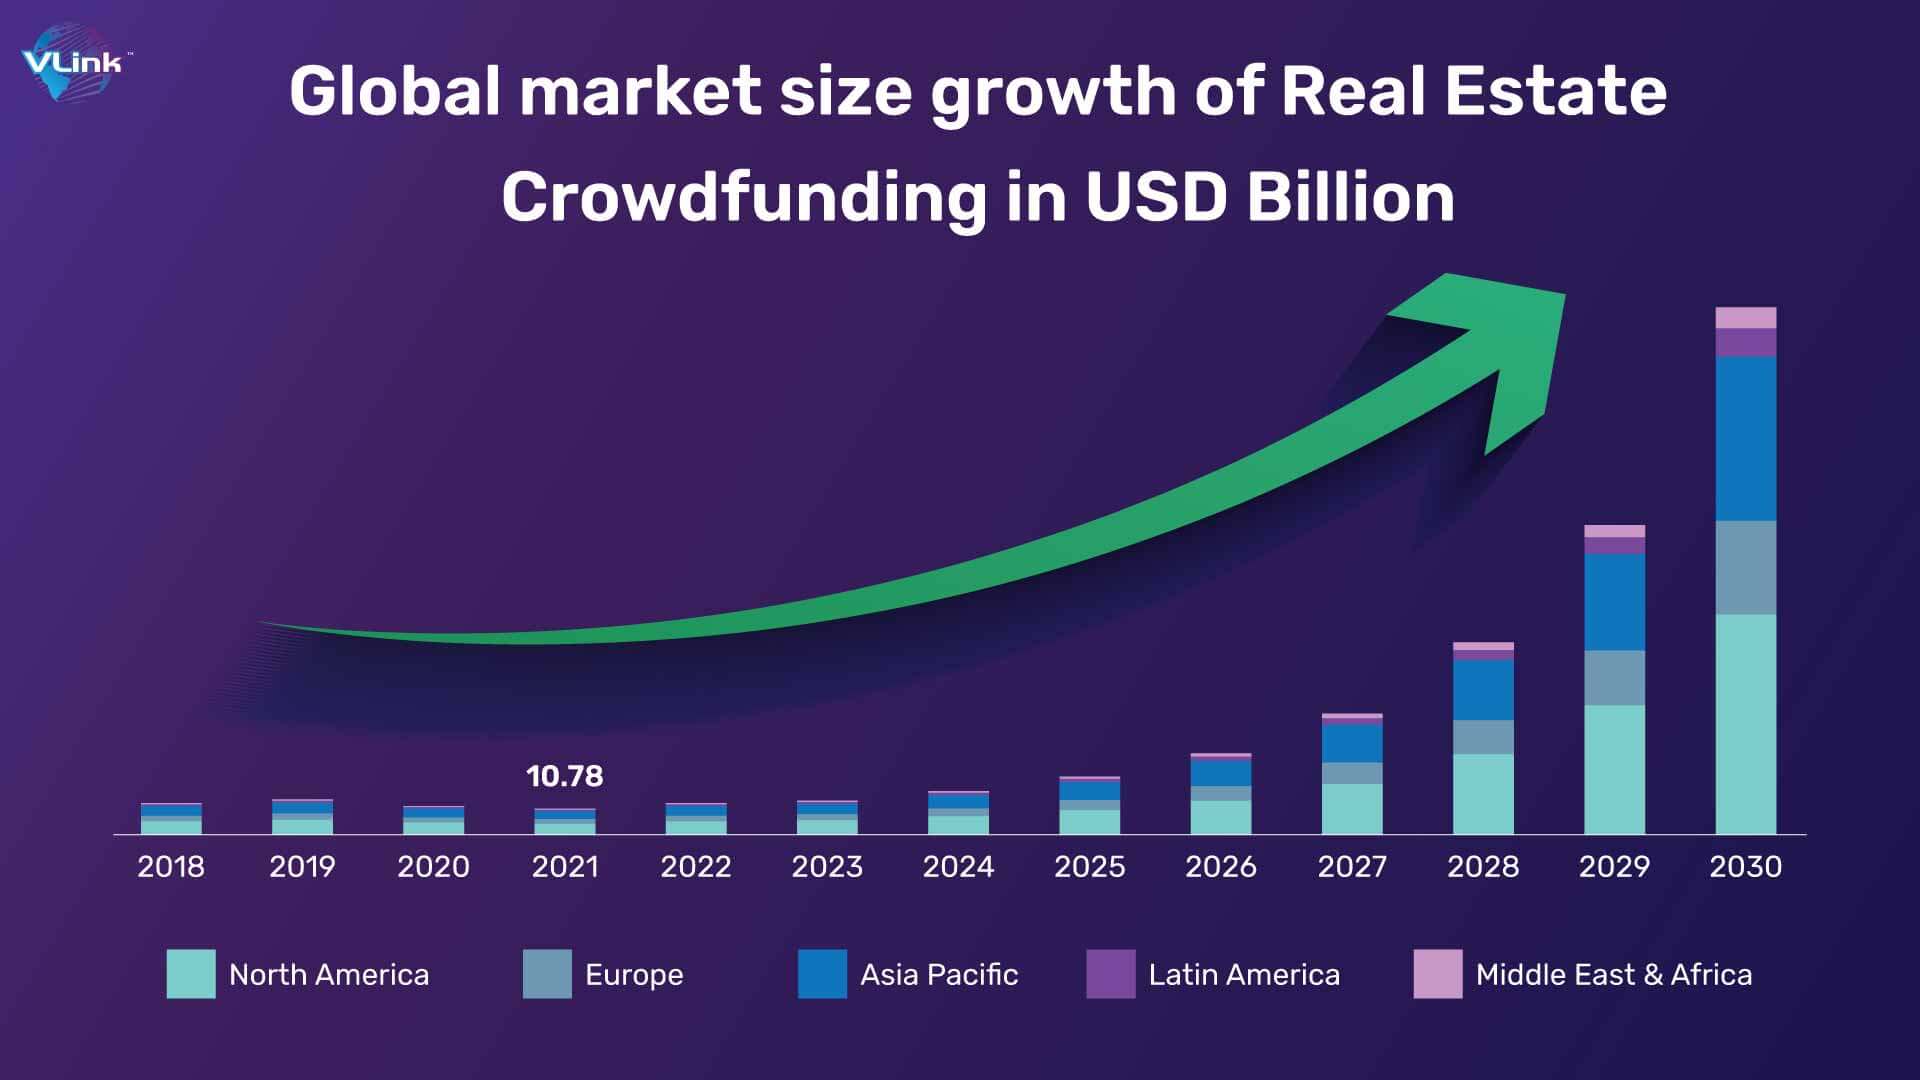 Global market size growth of Real Estate Crowdfunding in USD Billion